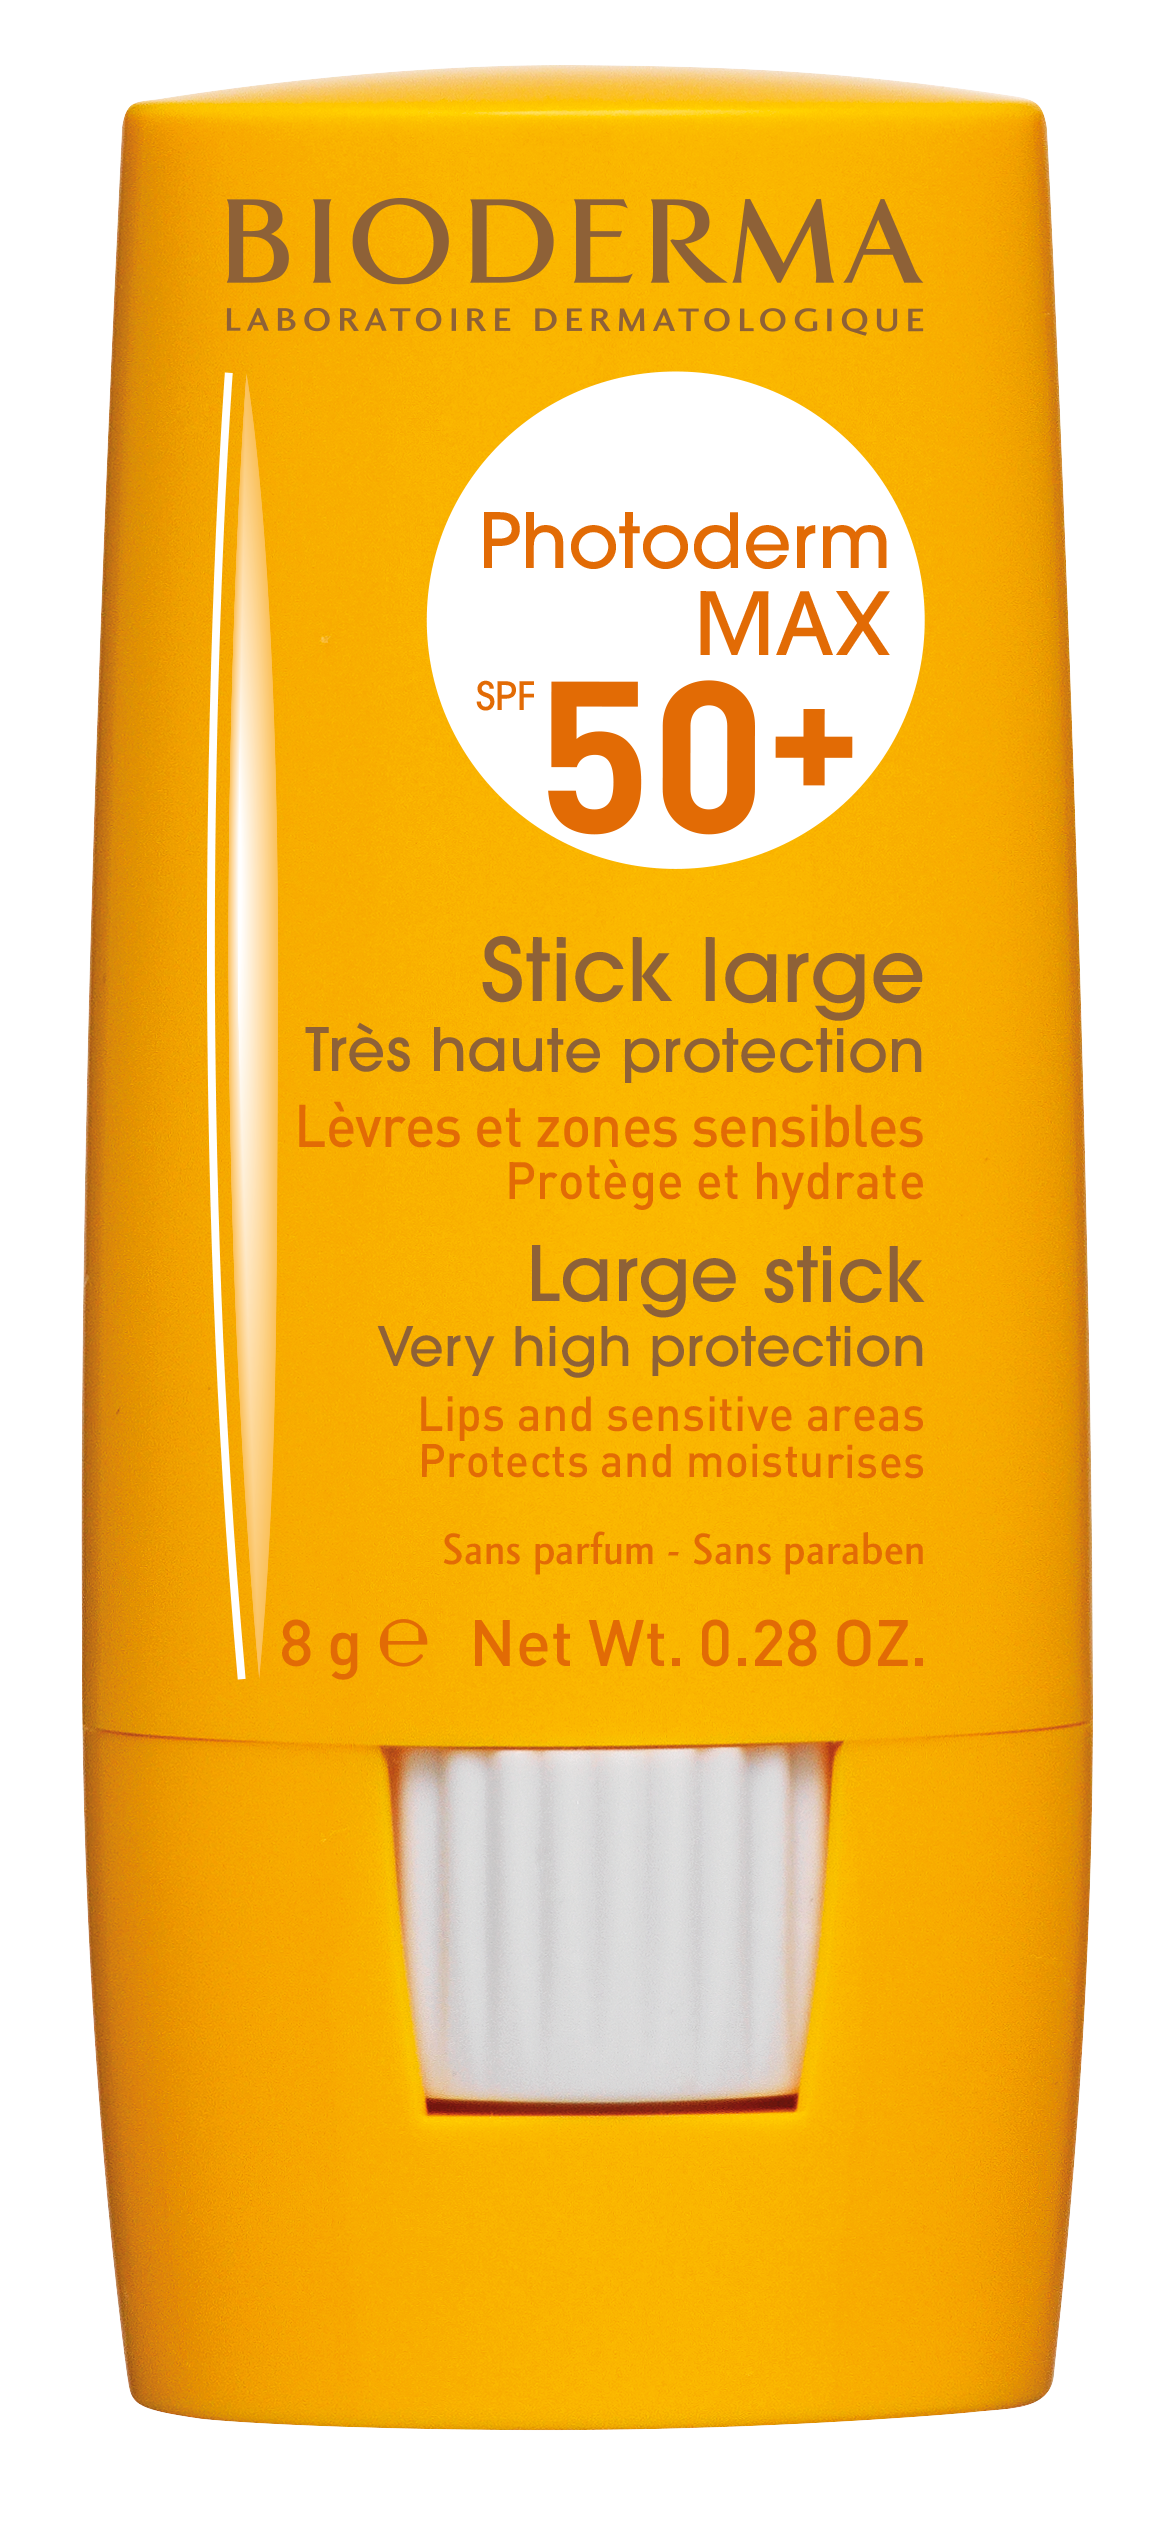 Bioderma Photoderm MAX Large Stick SPF50+ for All Skin Types 8g